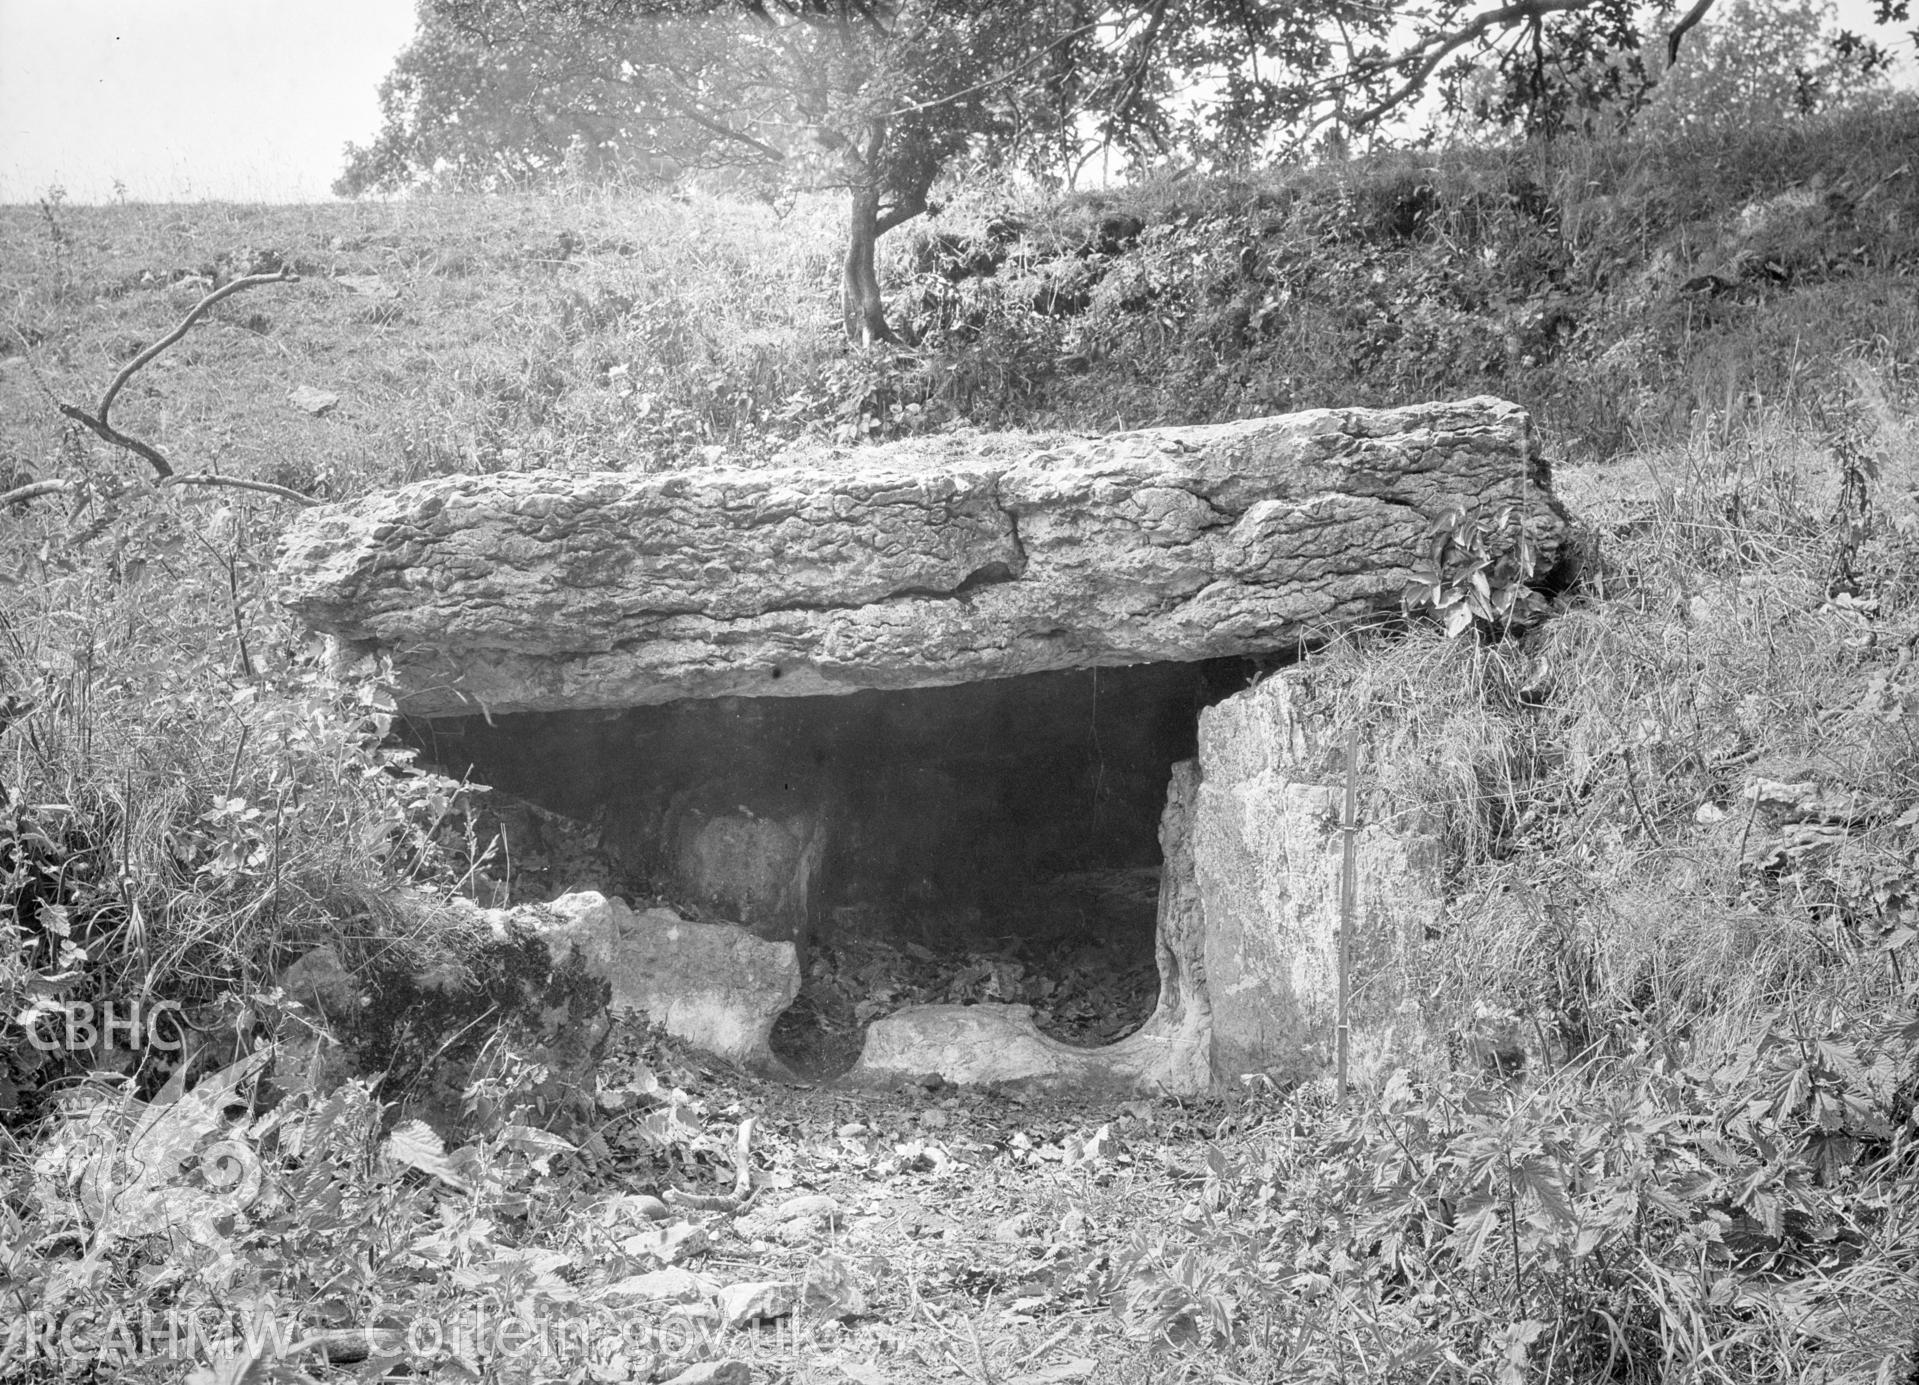 Digital copy of Bryn-yr-Hen Bobl Burial Chamber. From the Cadw Monuments in Care Collection.